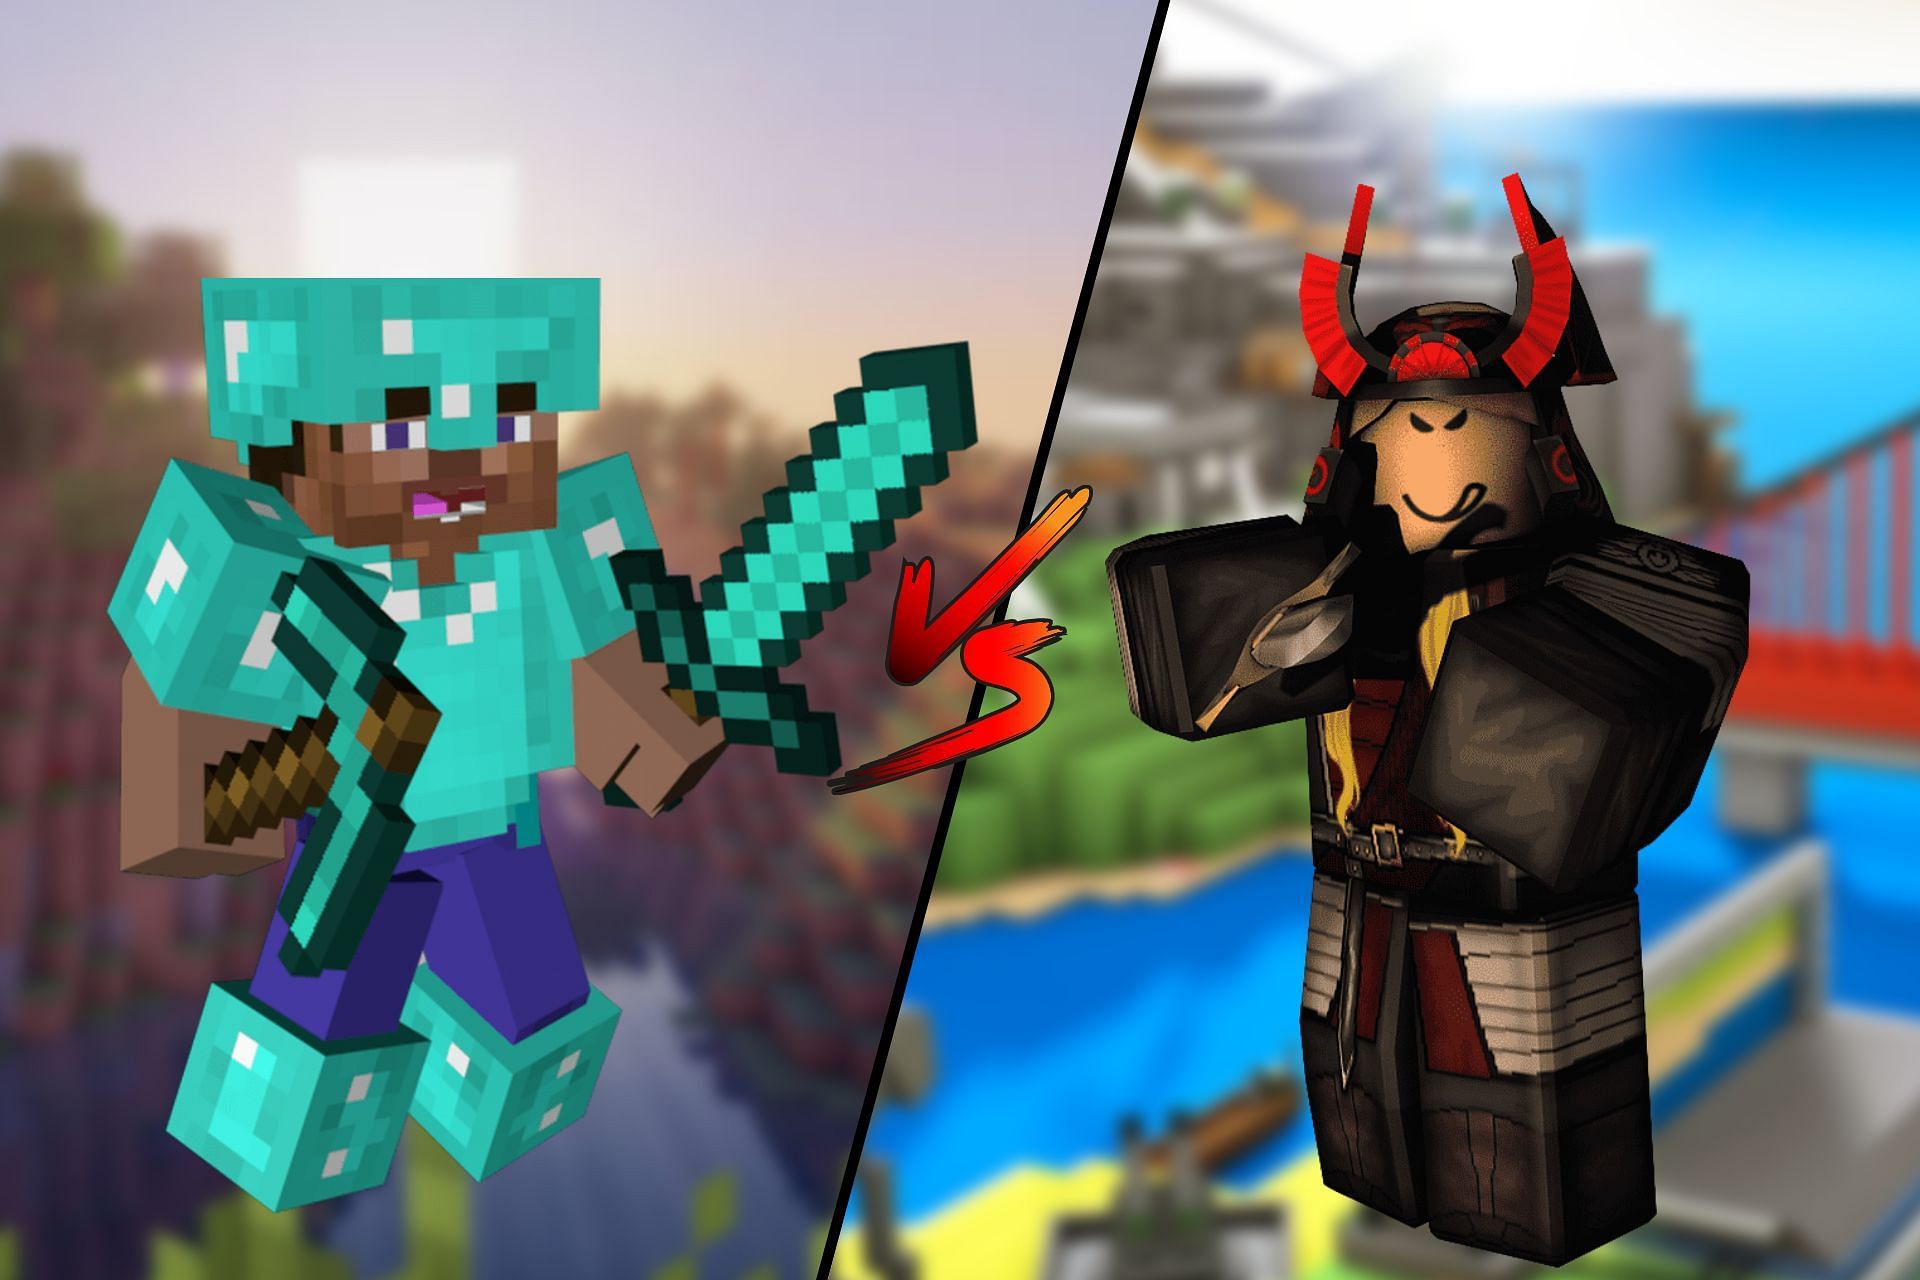 What Do You Prefer? Minecraft or Roblox? Games and Apps Edition